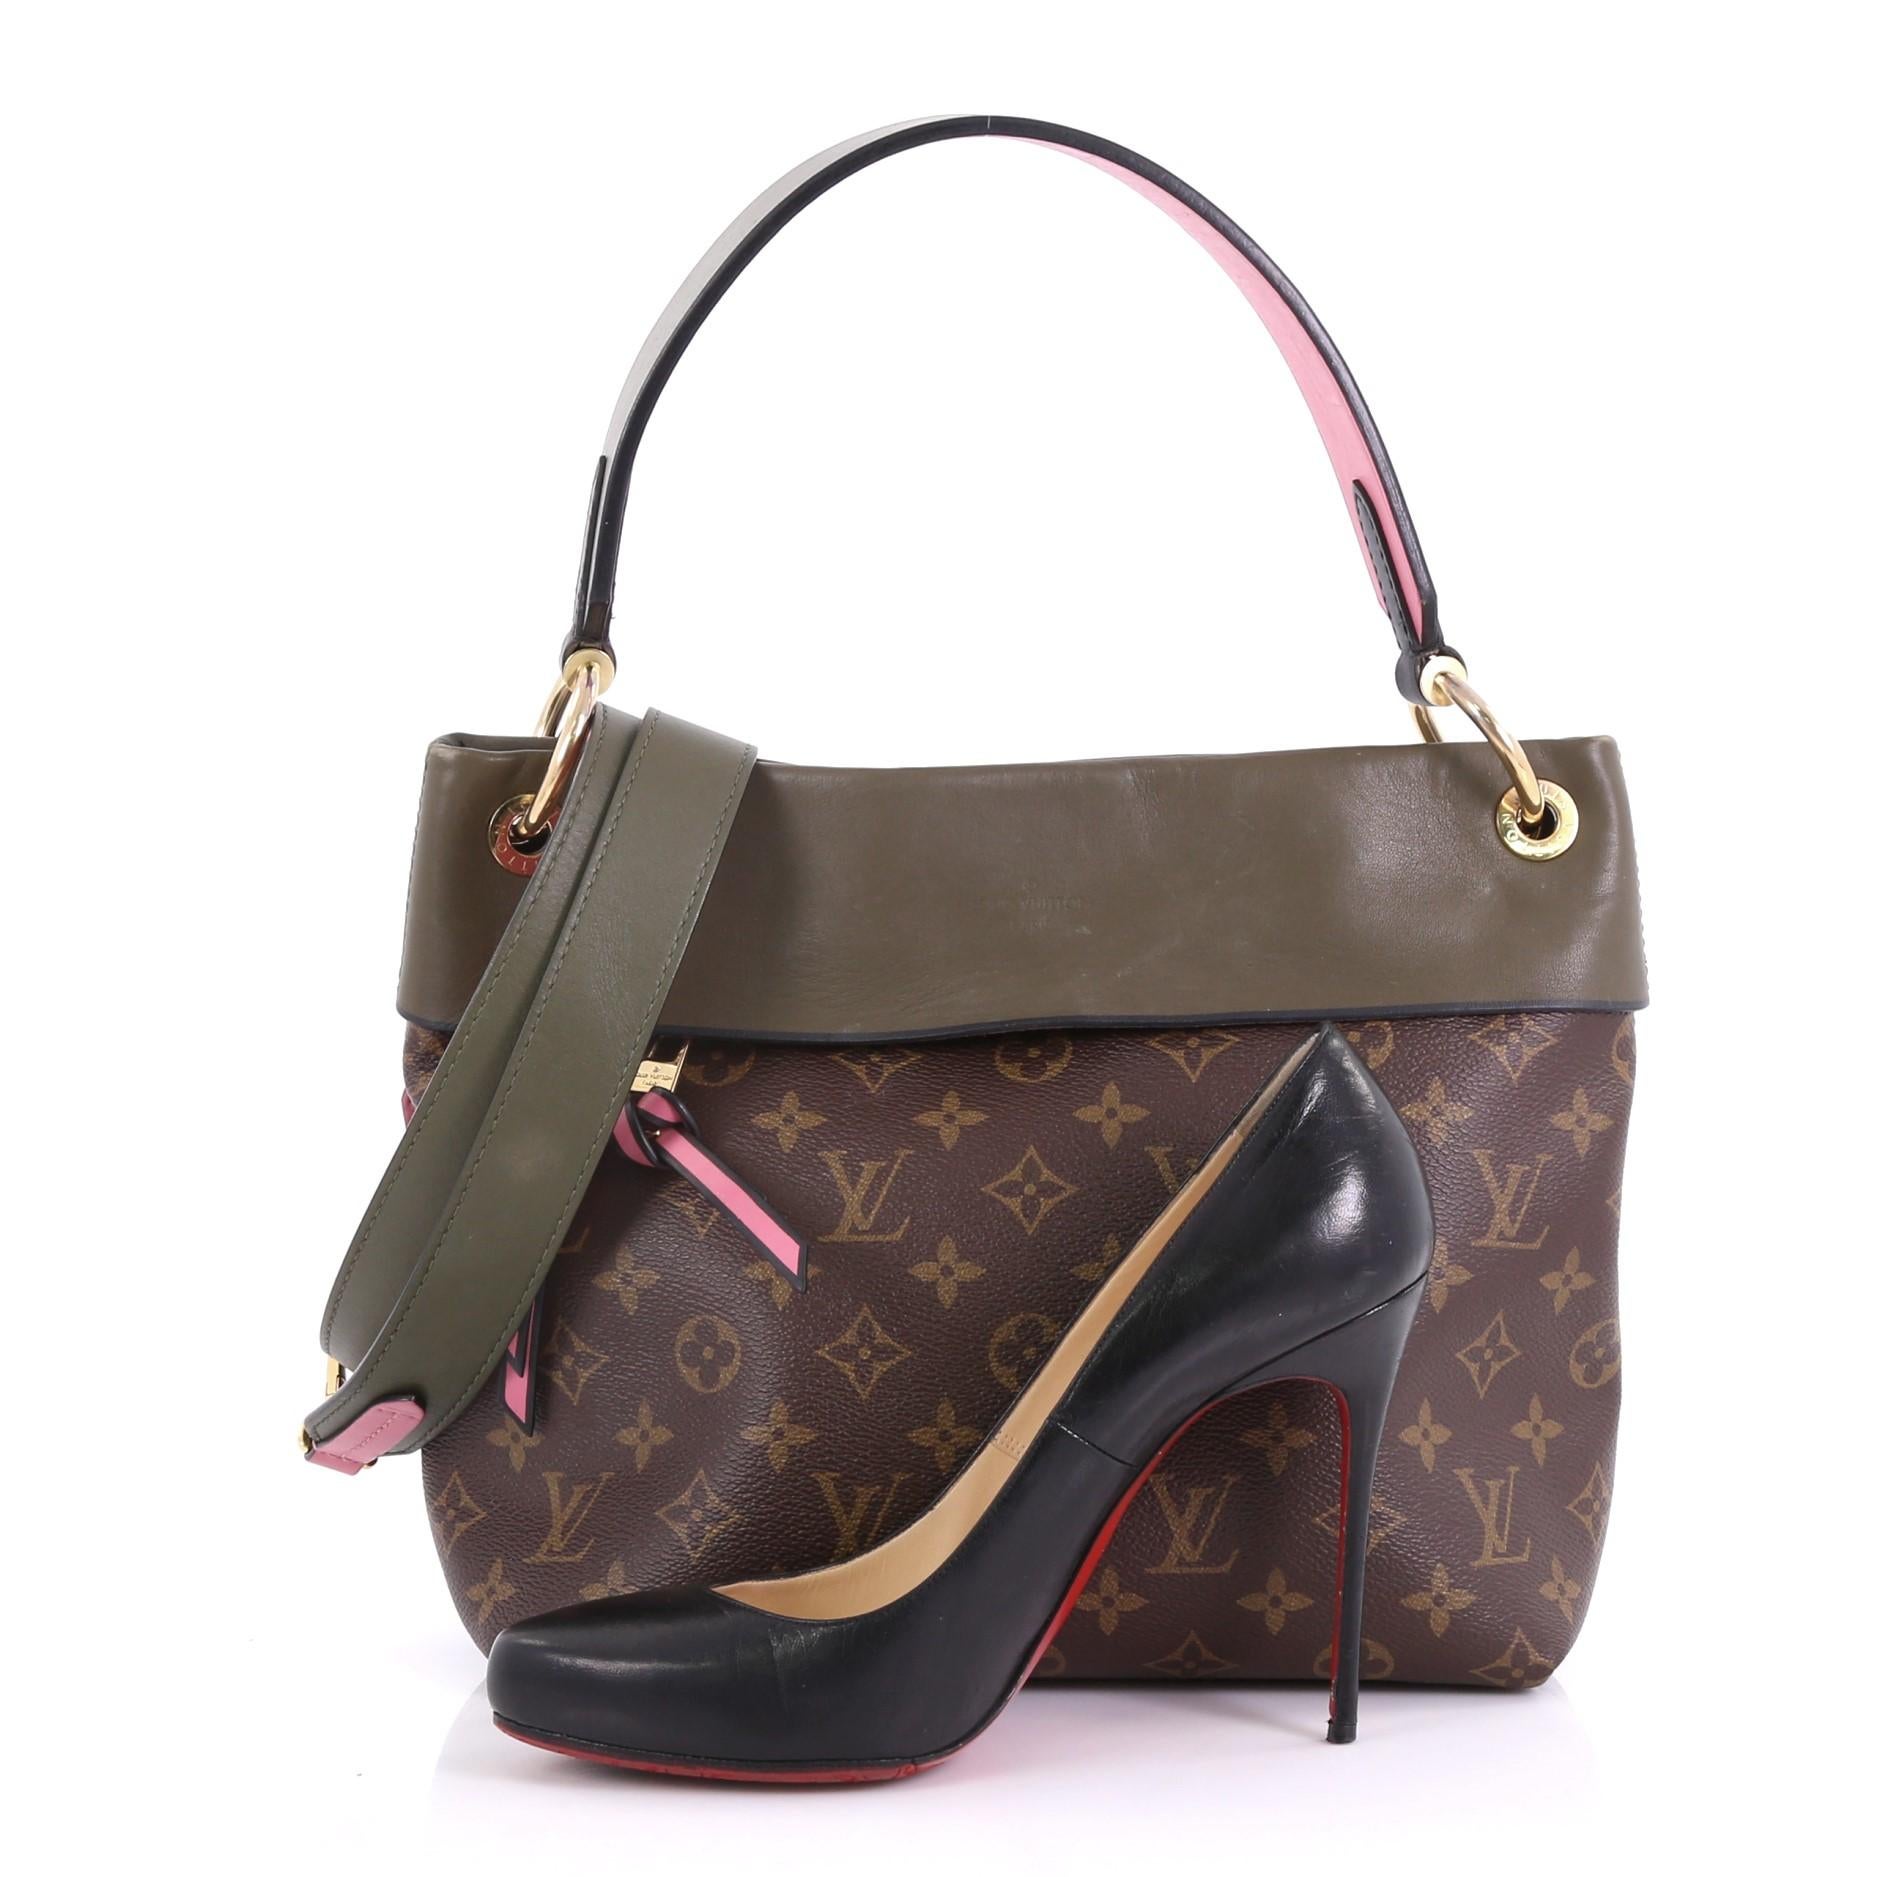 This Louis Vuitton Tuileries Besace Bag Monogram Canvas with Leather, crafted in brown monogram coated canvas with green leather, features a single loop leather handle and gold-tone hardware. Its hidden magnetic snap closure opens to a pink